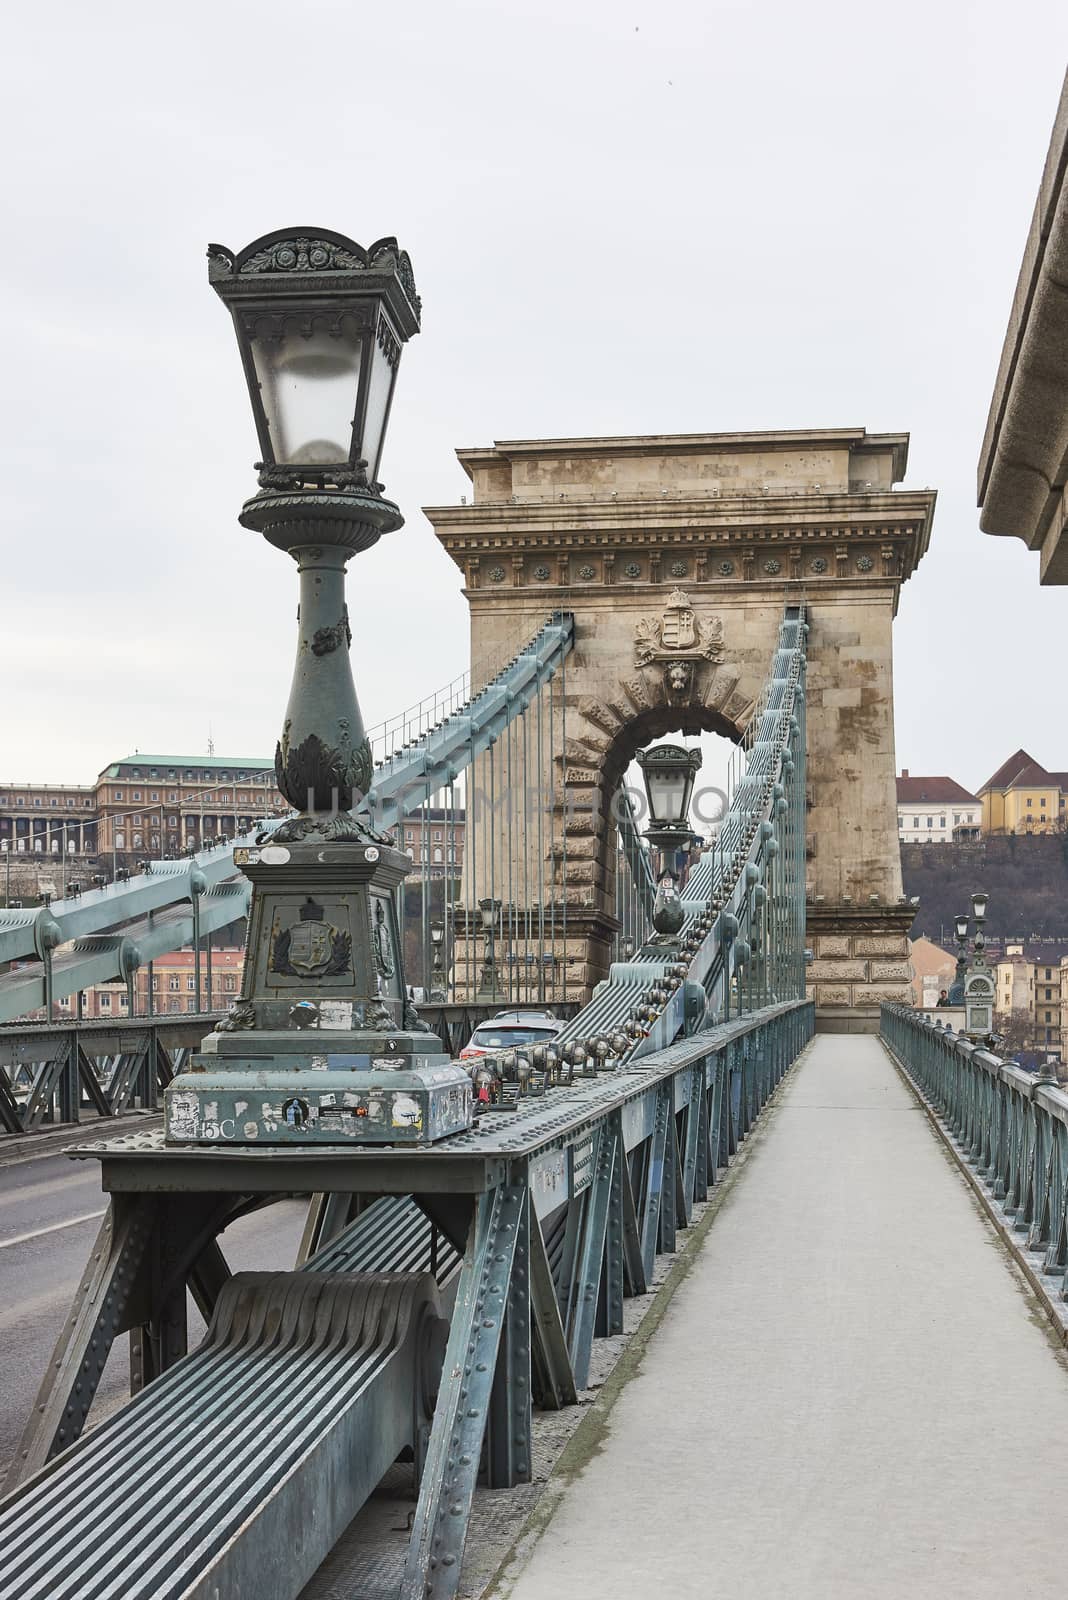 Szechenyi Chain Bridge with Buda Castle in the background. February 02, 2016 in Budapest, Hungary.